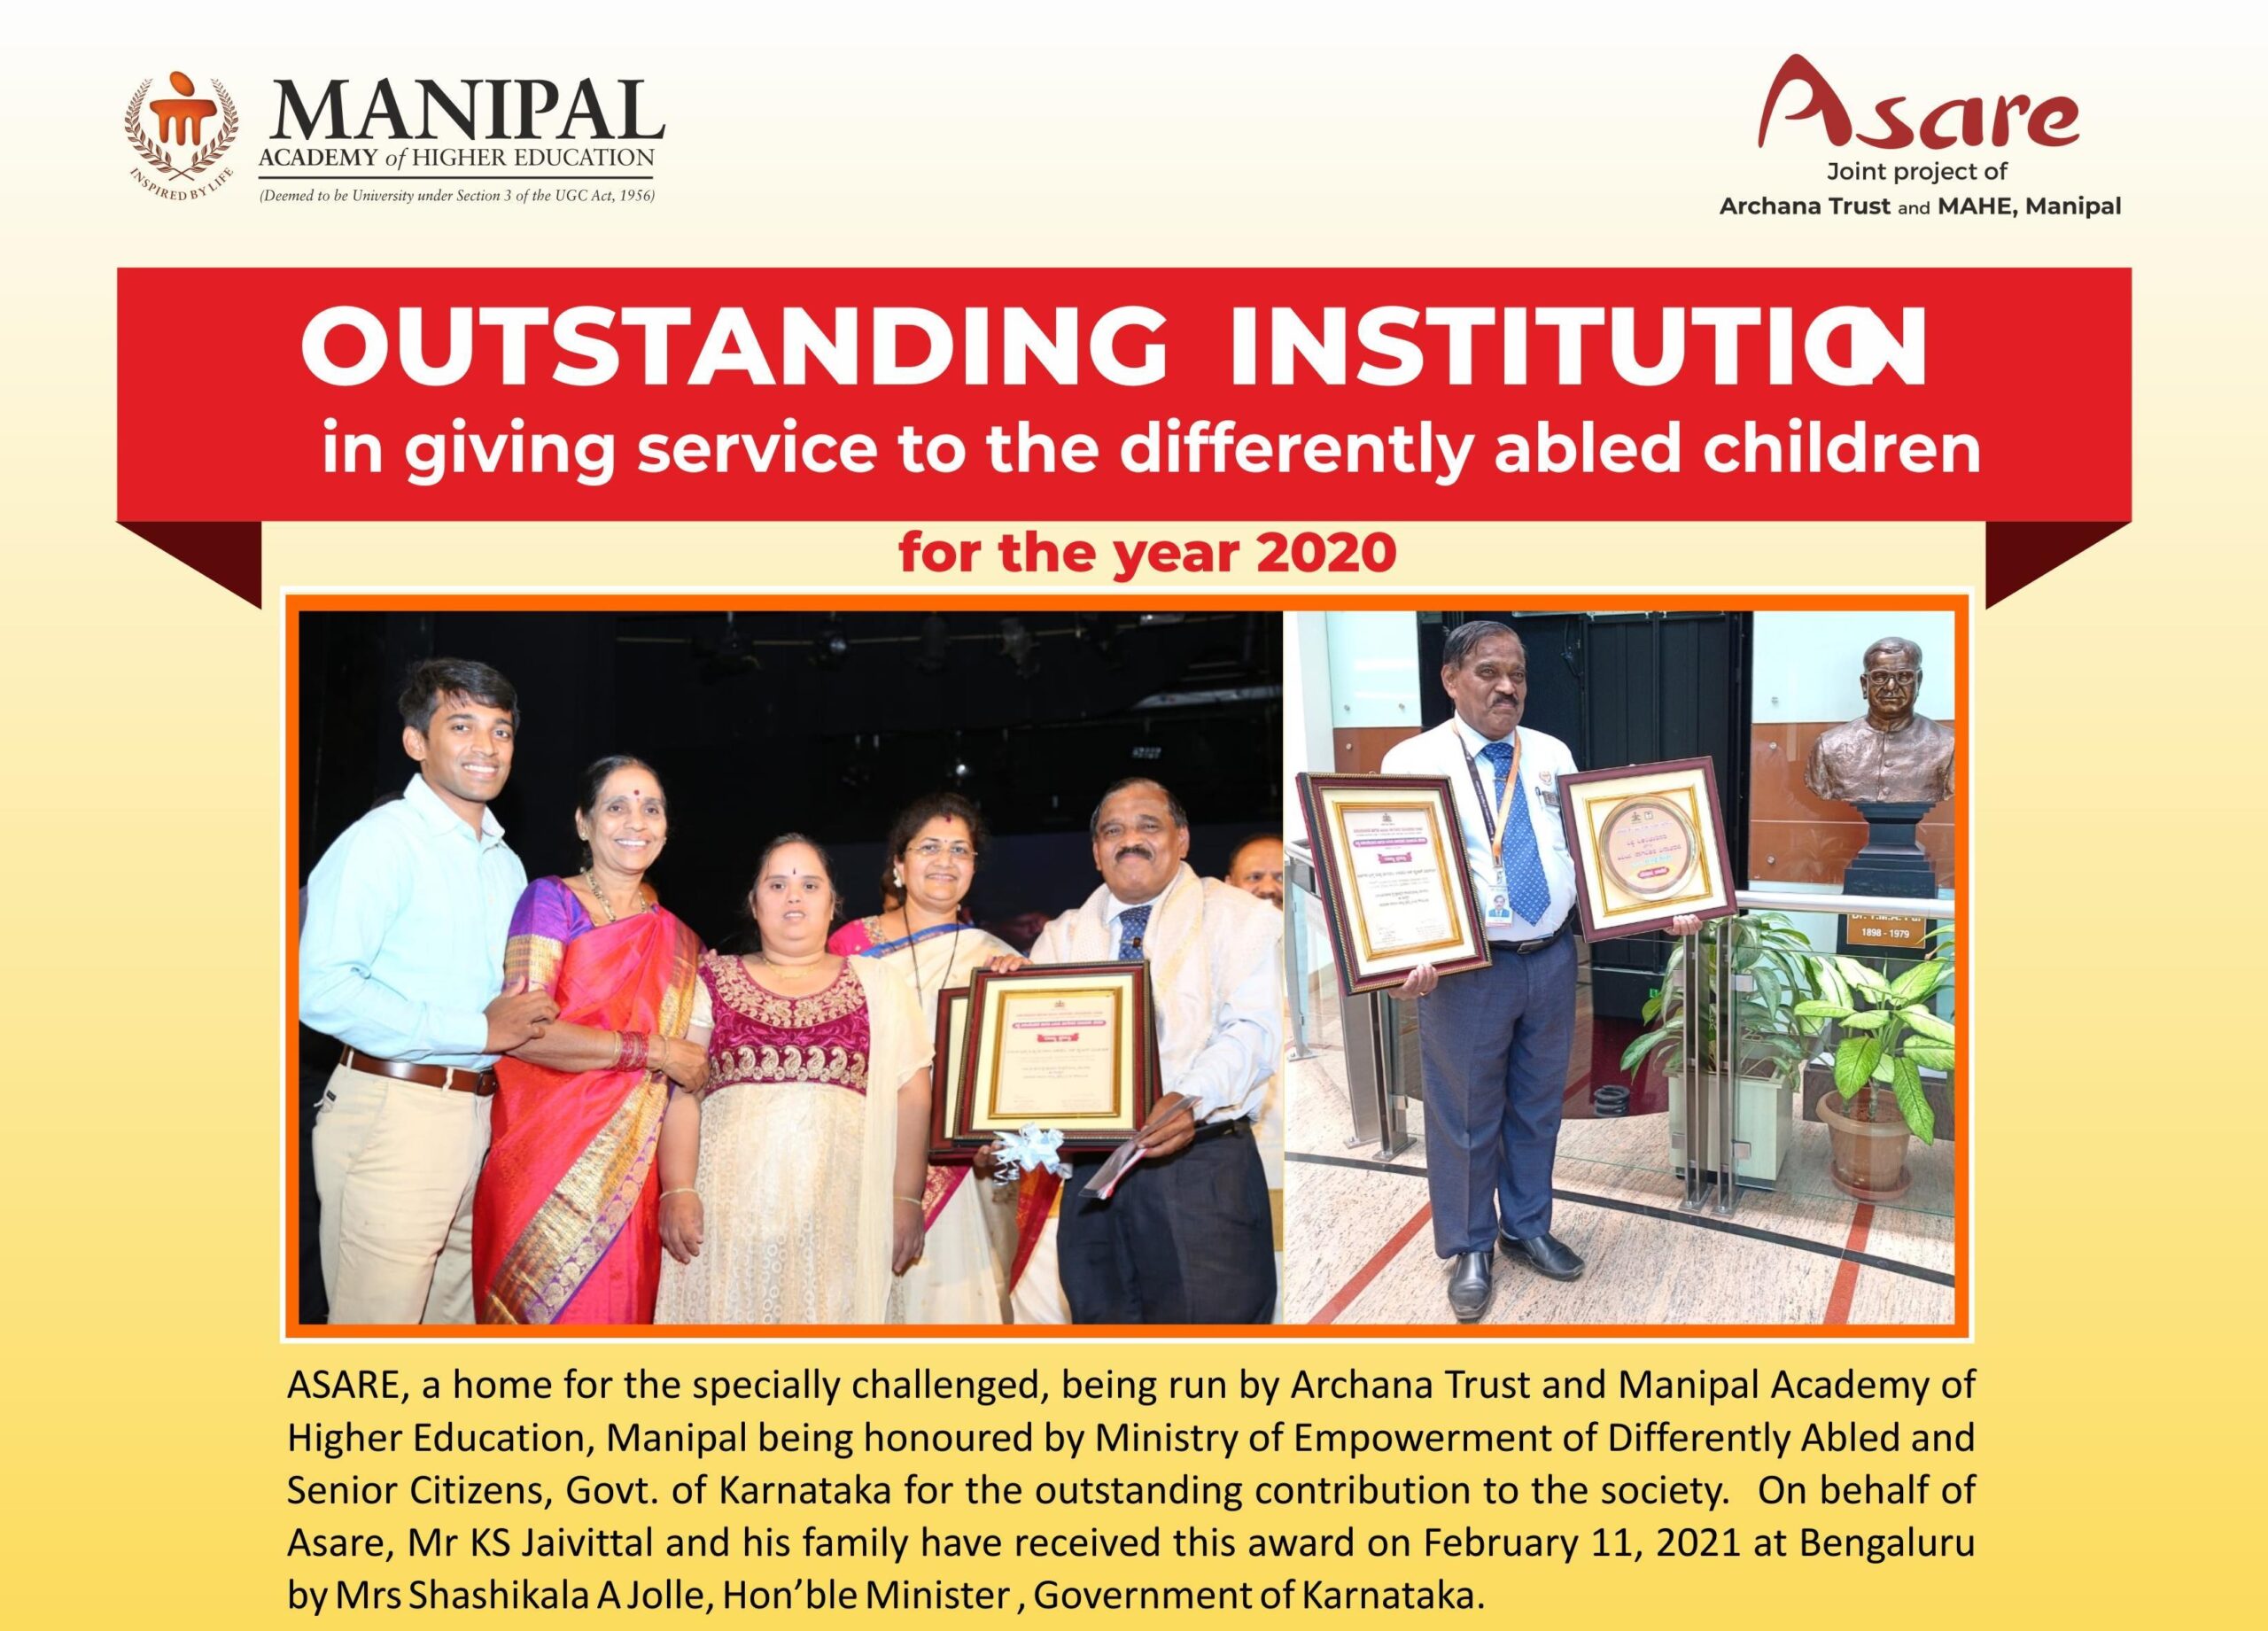 ASARE receives outstanding recognition Award from Government of Karnataka